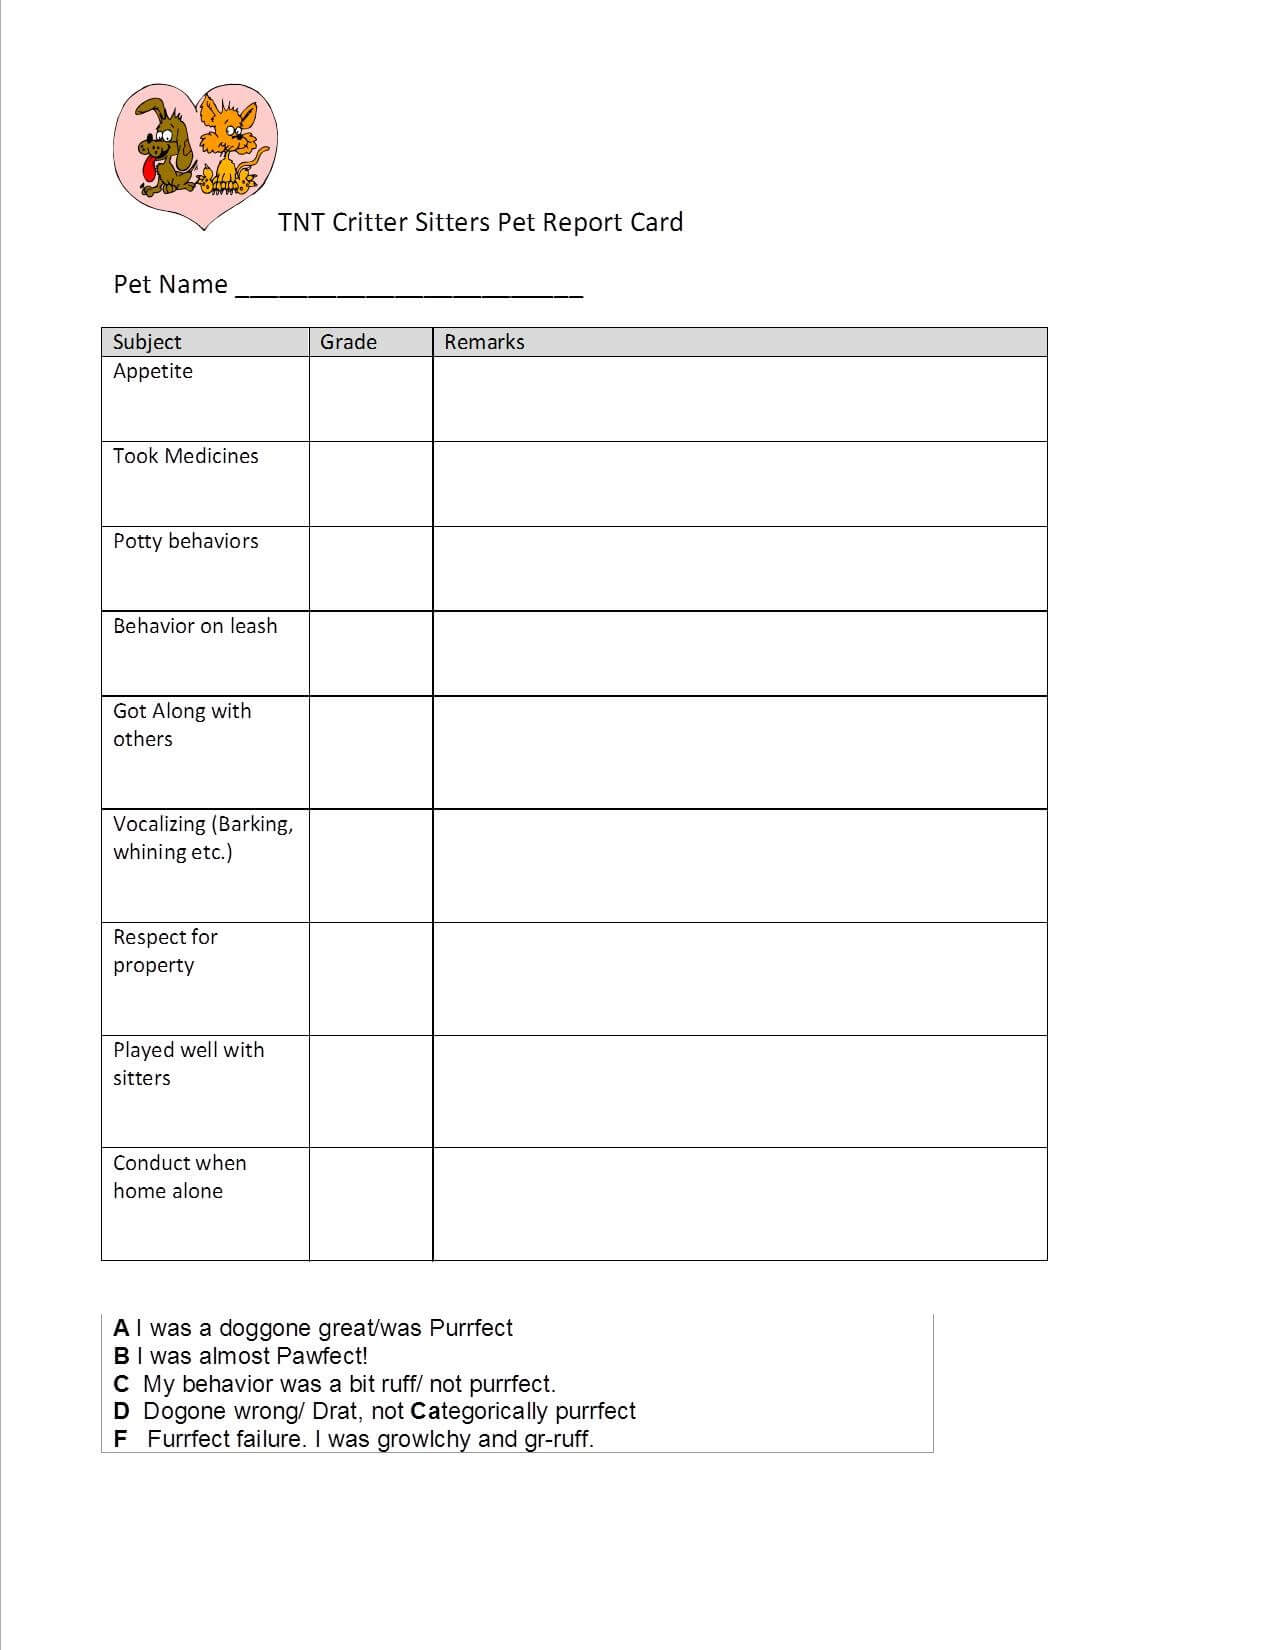 30 Images Of Pet Report Card Template | Bfegy Within Boyfriend Report Card Template